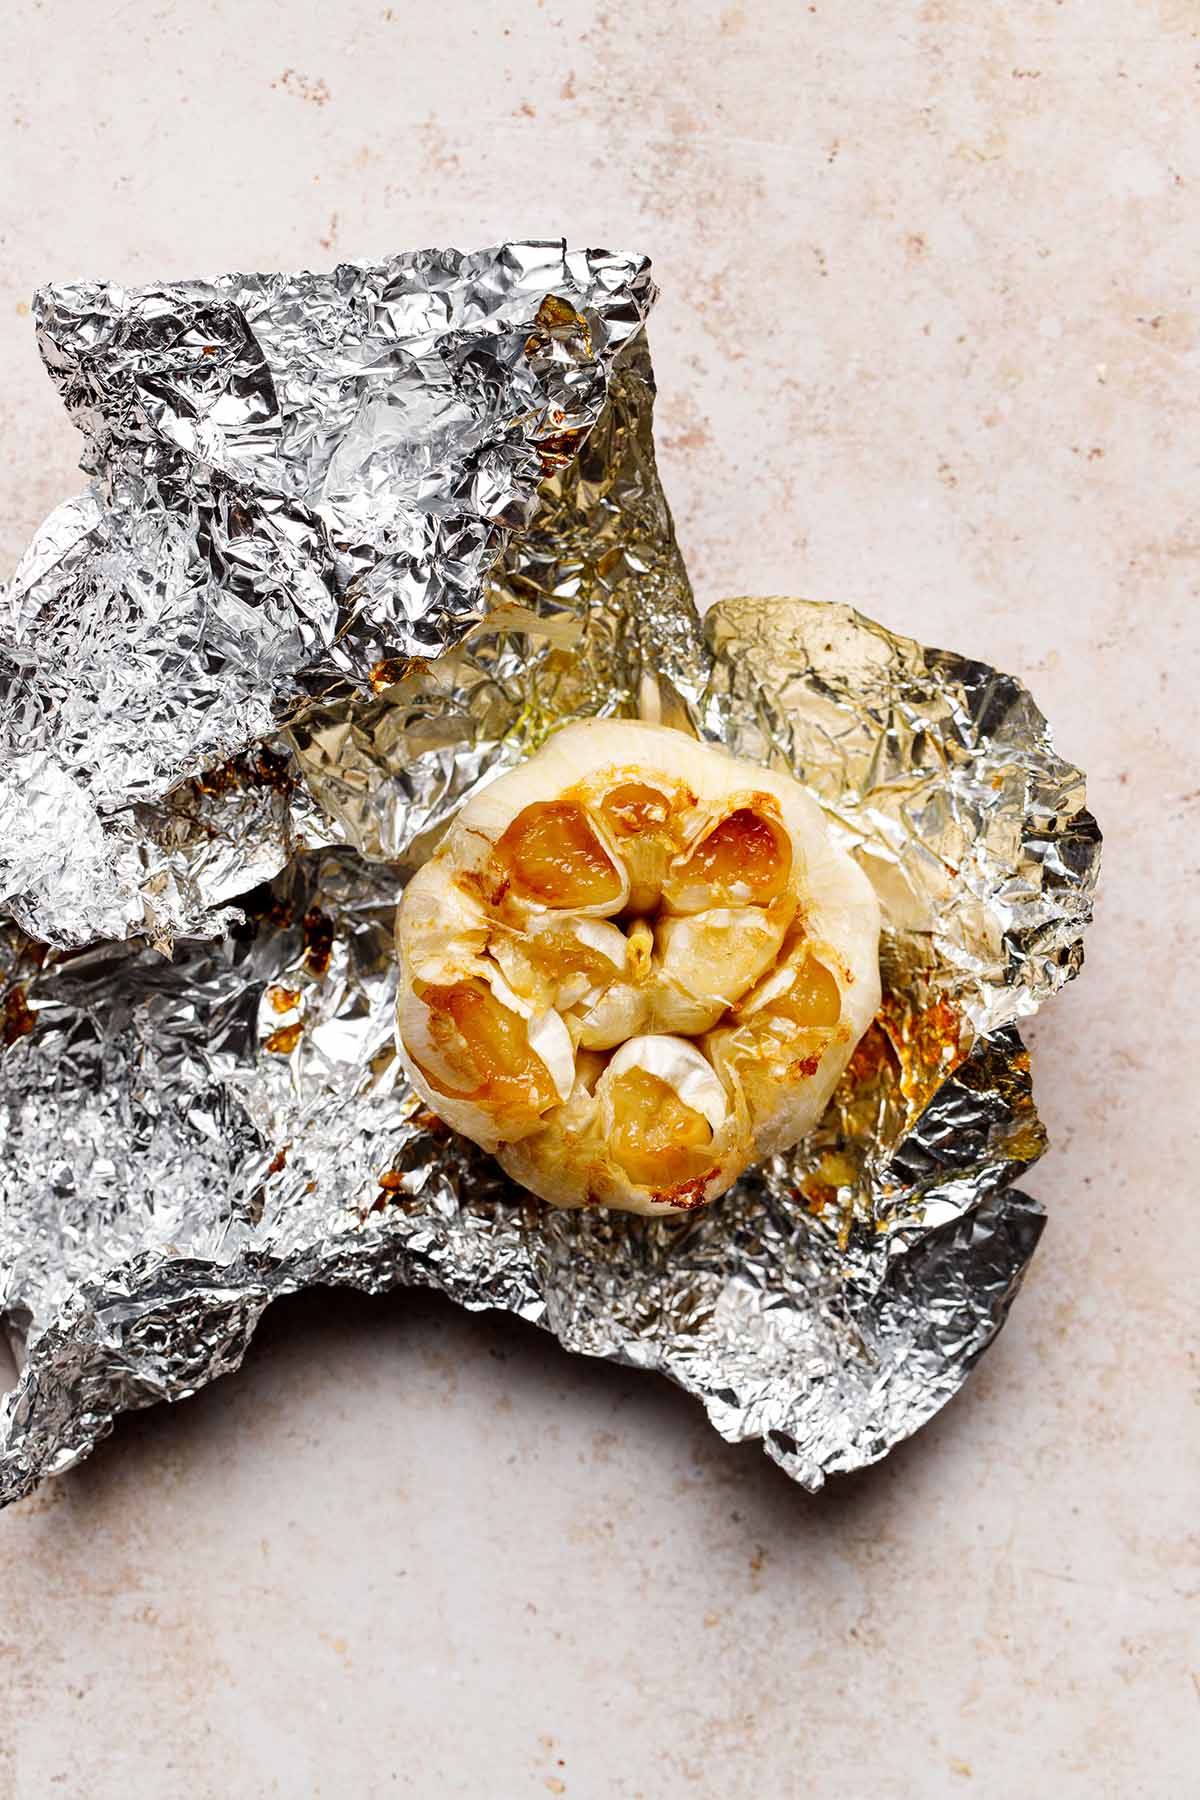 A bulb of cooked garlic sitting on crumpled aluminium foil.